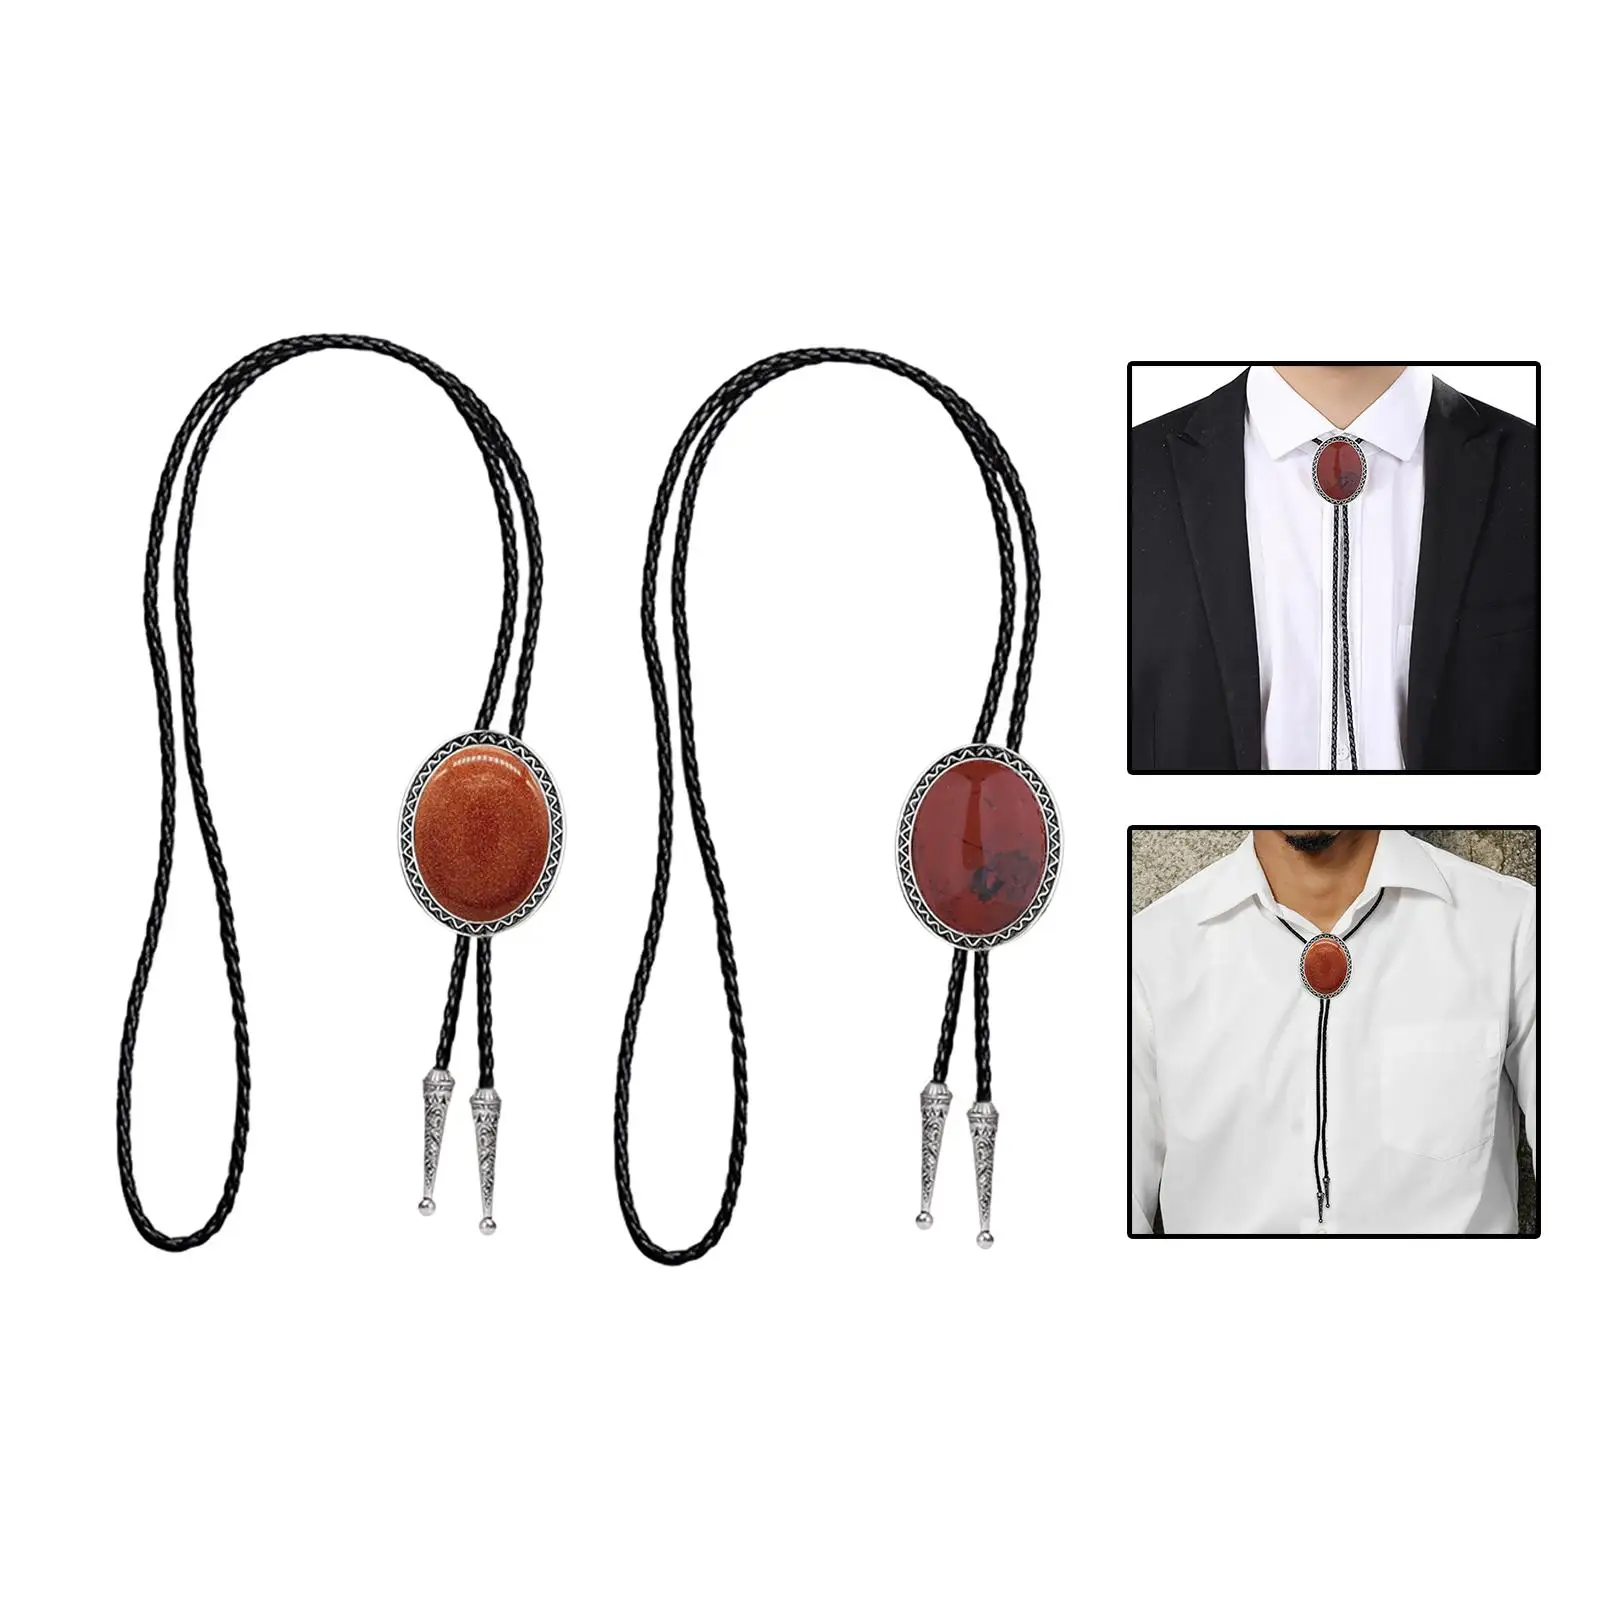 Cowboy Bolo Tie American Style Pendant Stylish Chain Vintage Style Fashion Necktie for Engagement Birthday Party Graduation Prom